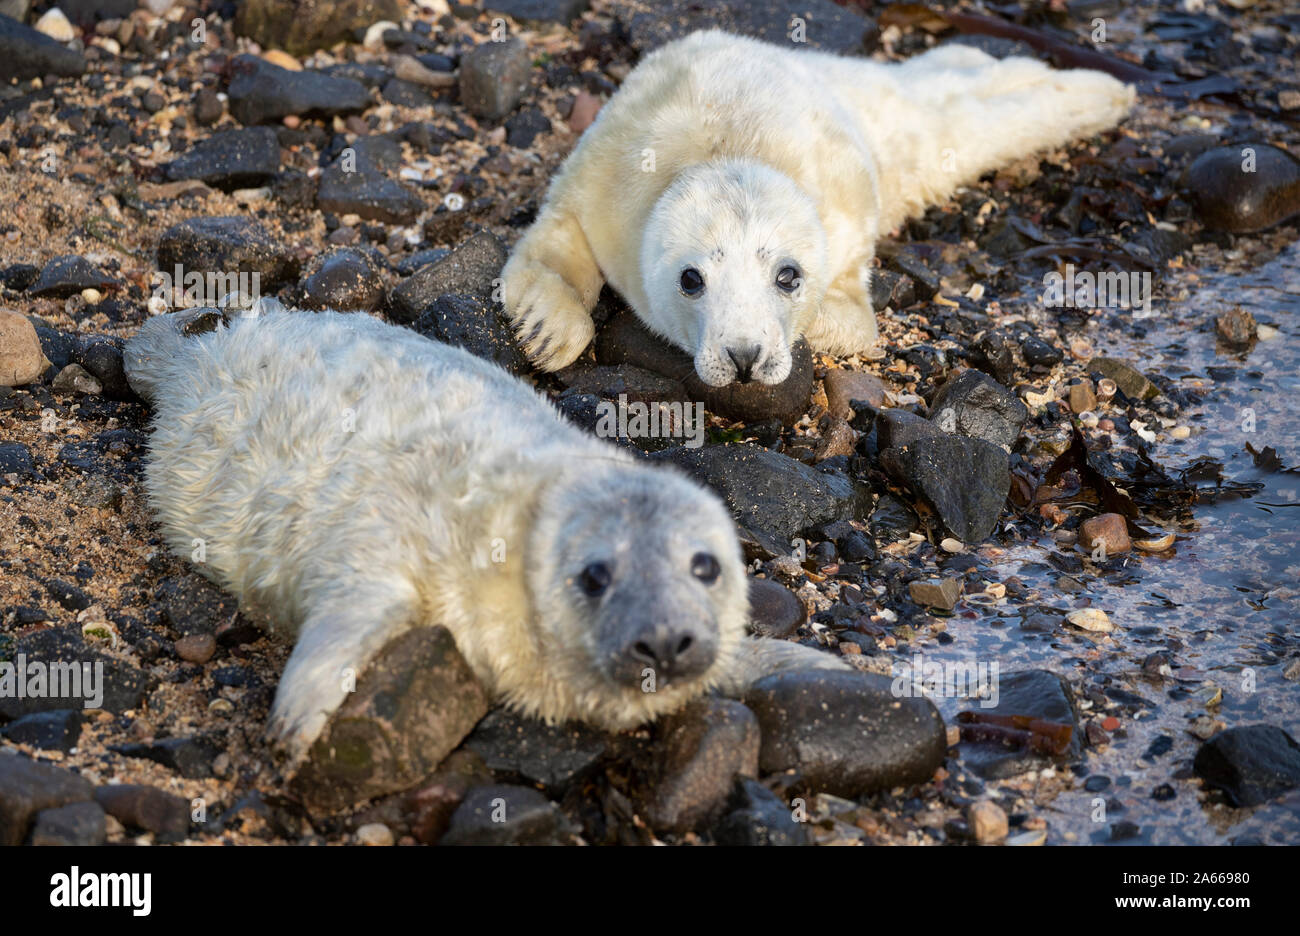 Grey seal pups on the Isle of May in the Firth of Forth. The island is one of Scottish Natural Heritage's National Nature Reserves, home to one of the UKs most important grey seal colonies. Stock Photo